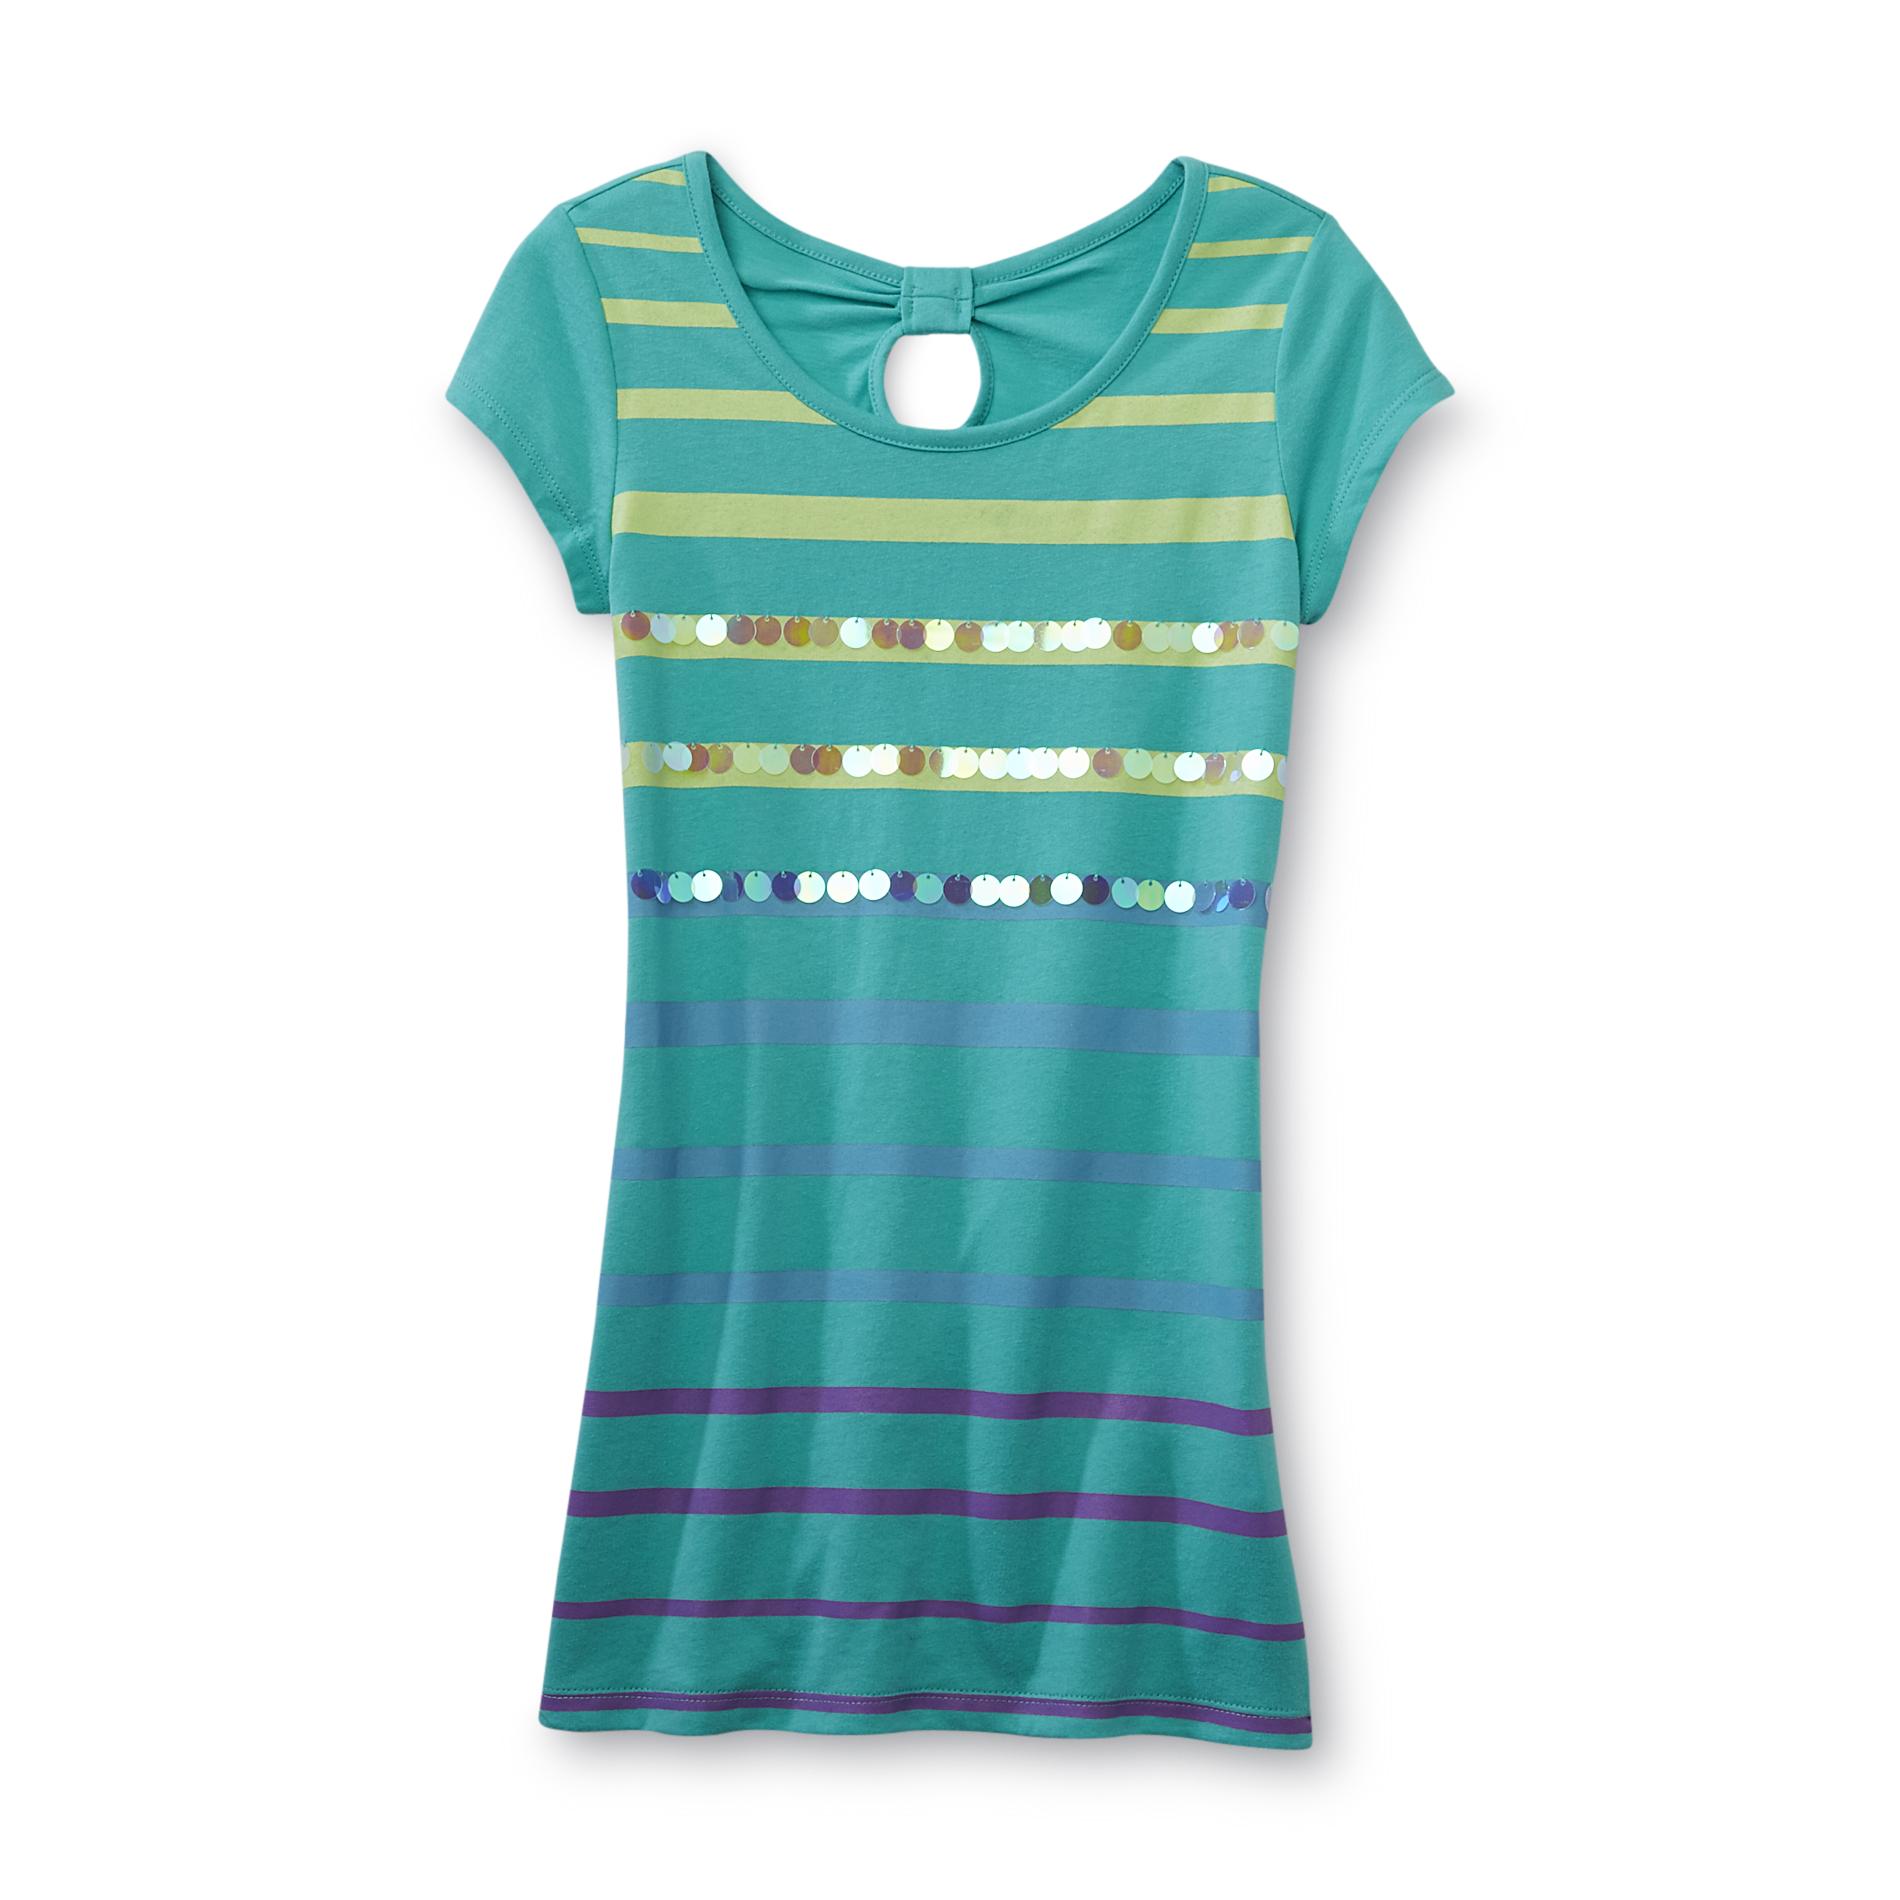 Basic Editions Girl's Short-Sleeve Tunic Top - Sequin Stripes